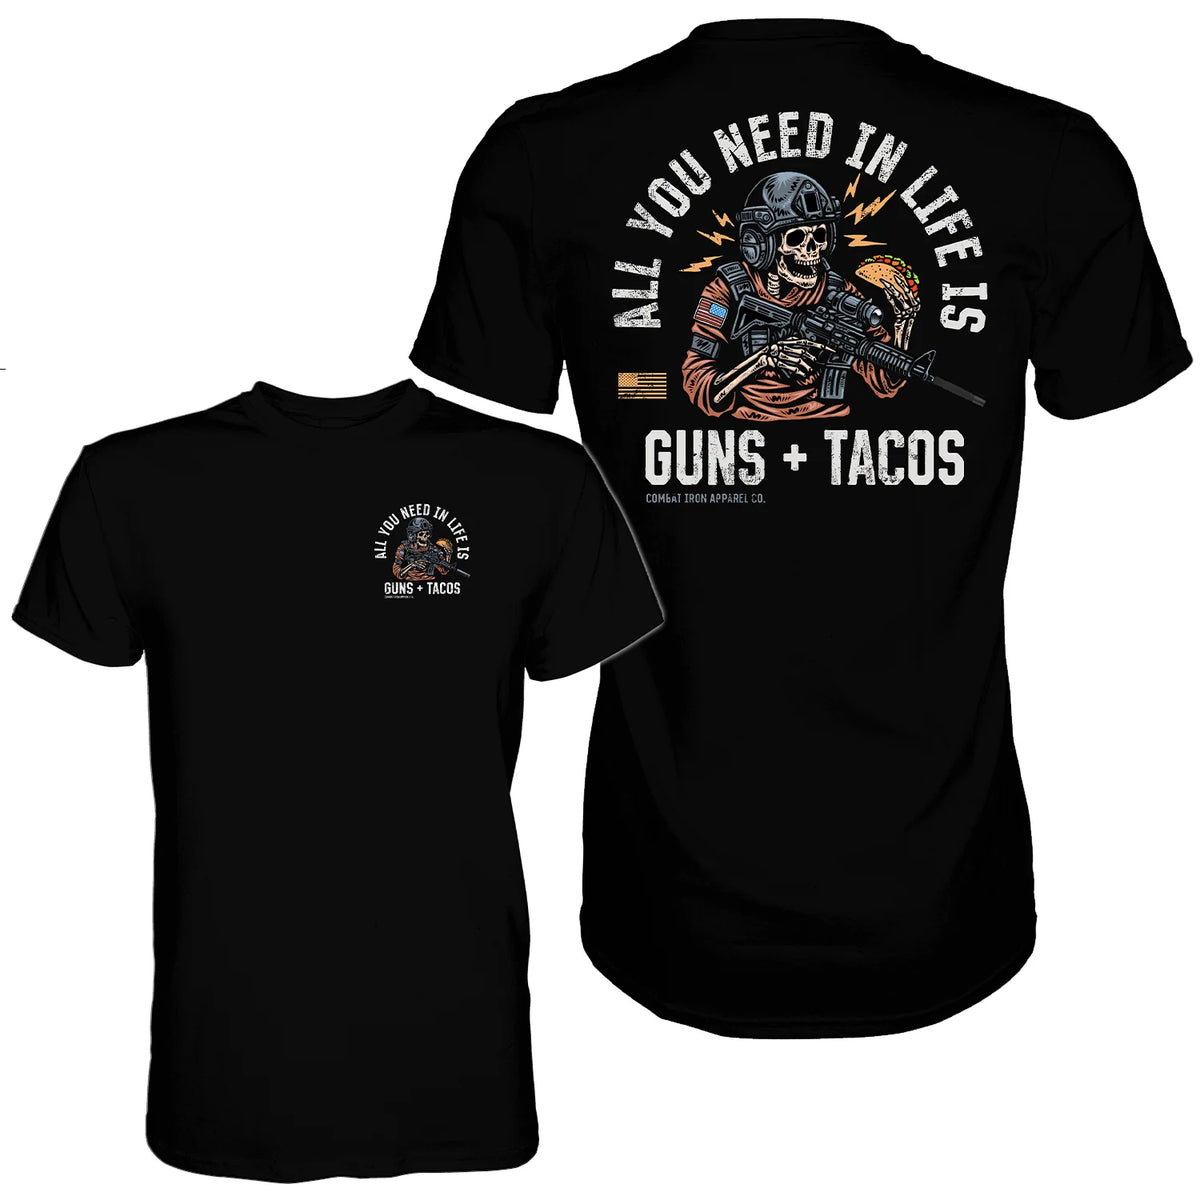 All You Need In Life Is Guns & Tacos